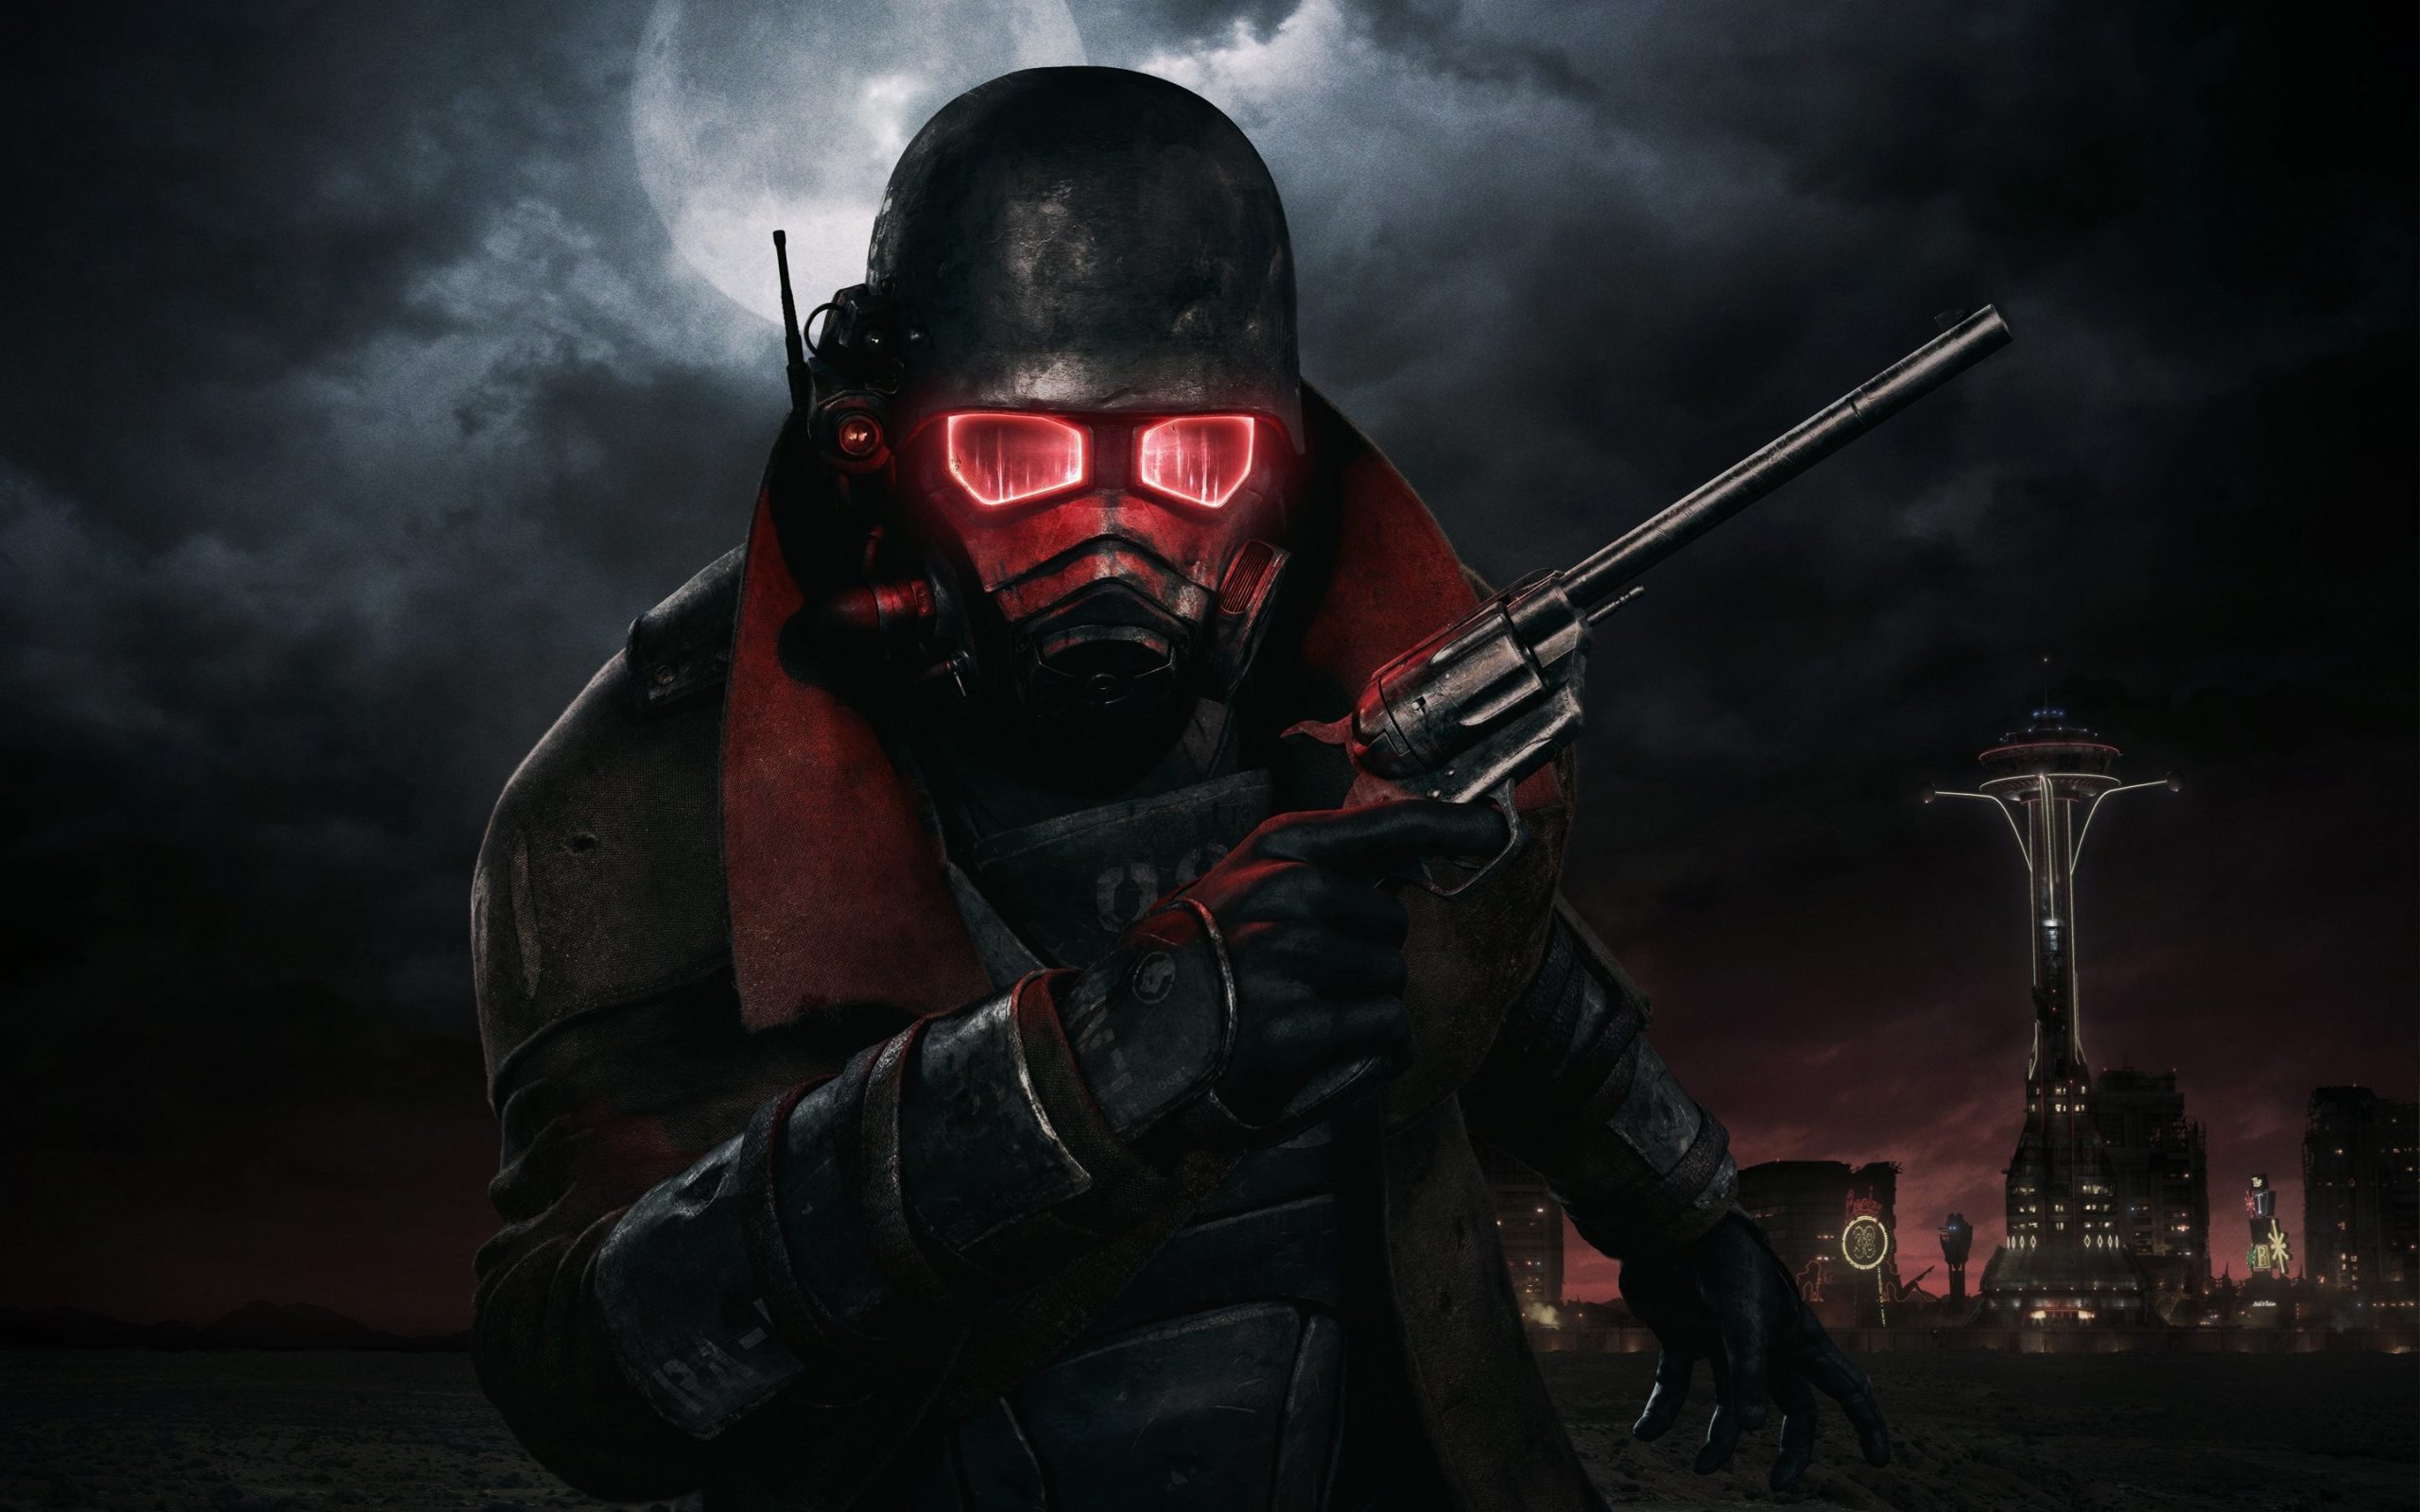 NCR Defect Build for Fallout: New Vegas